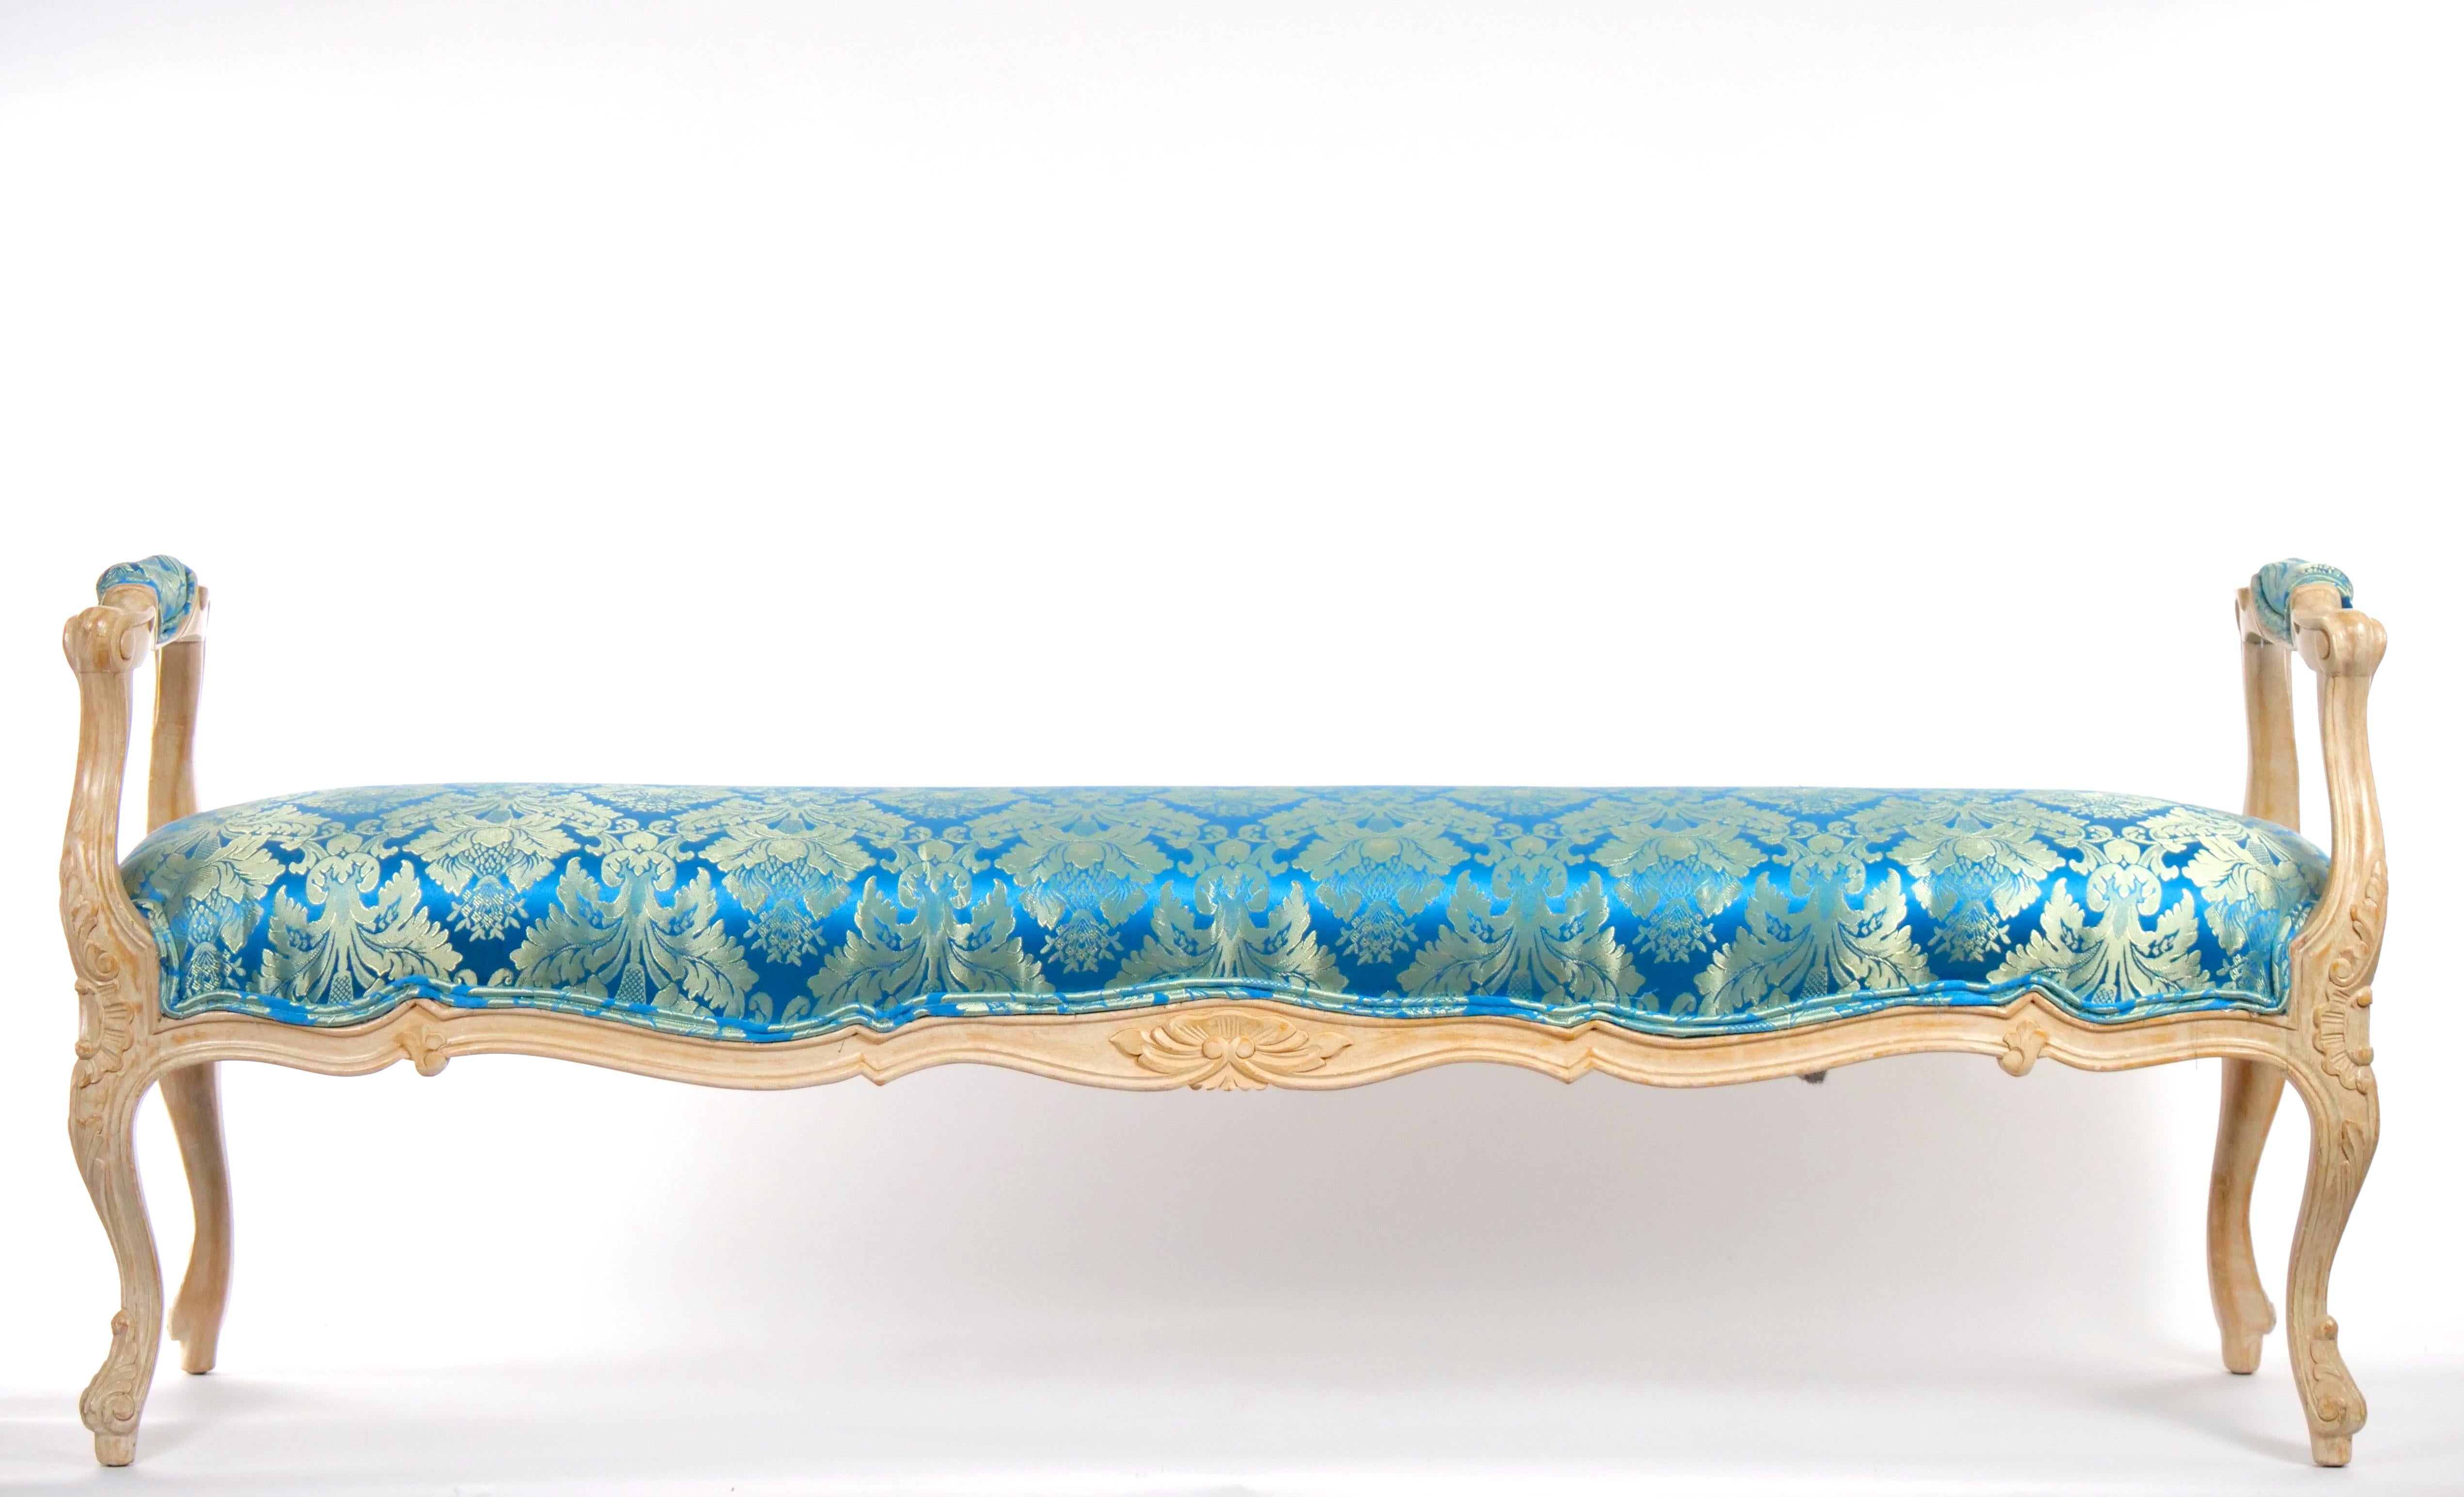 Beautiful Italian Louis XVI style painted wooden frame and hand decorated floral design bench with silk damask blend upholstered seat from the mid century. This bench features hand carved fluted details to the arm rails and legs. The arms are padded